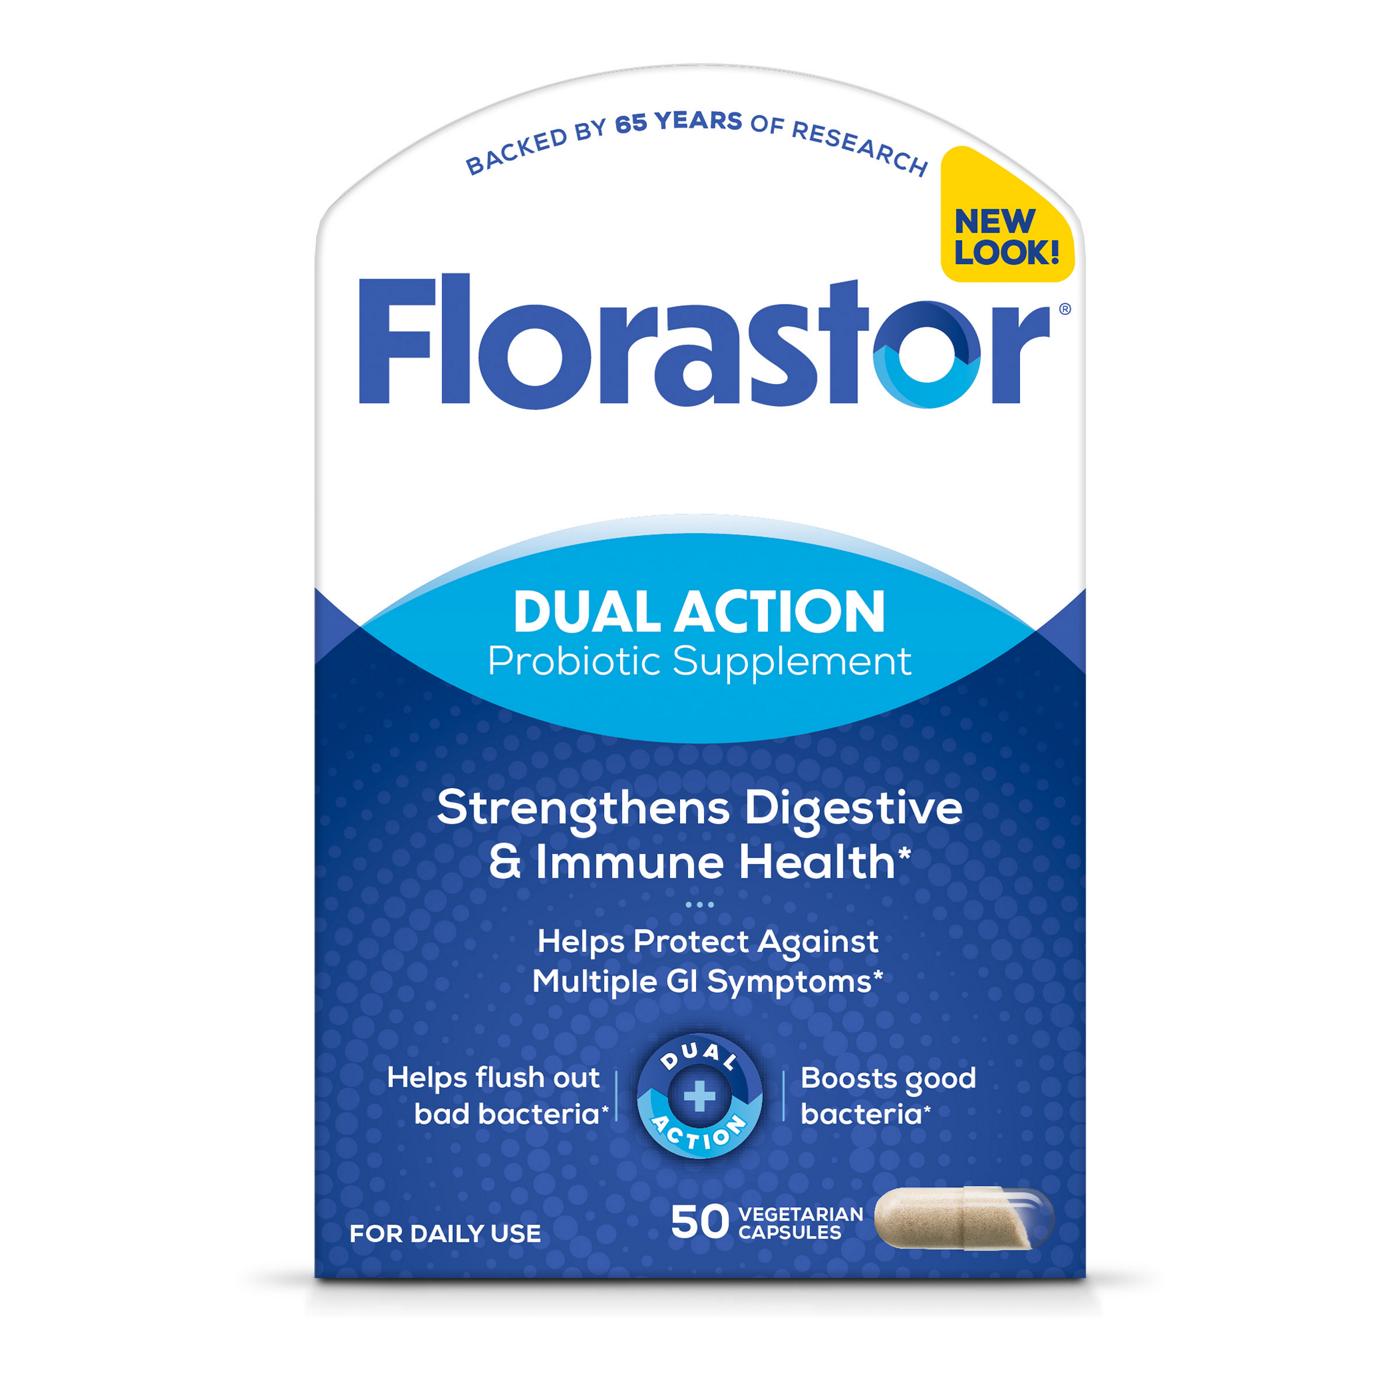 Florastor Unisex Daily Probiotic Supplement Capsules for Digestive Health; image 1 of 4